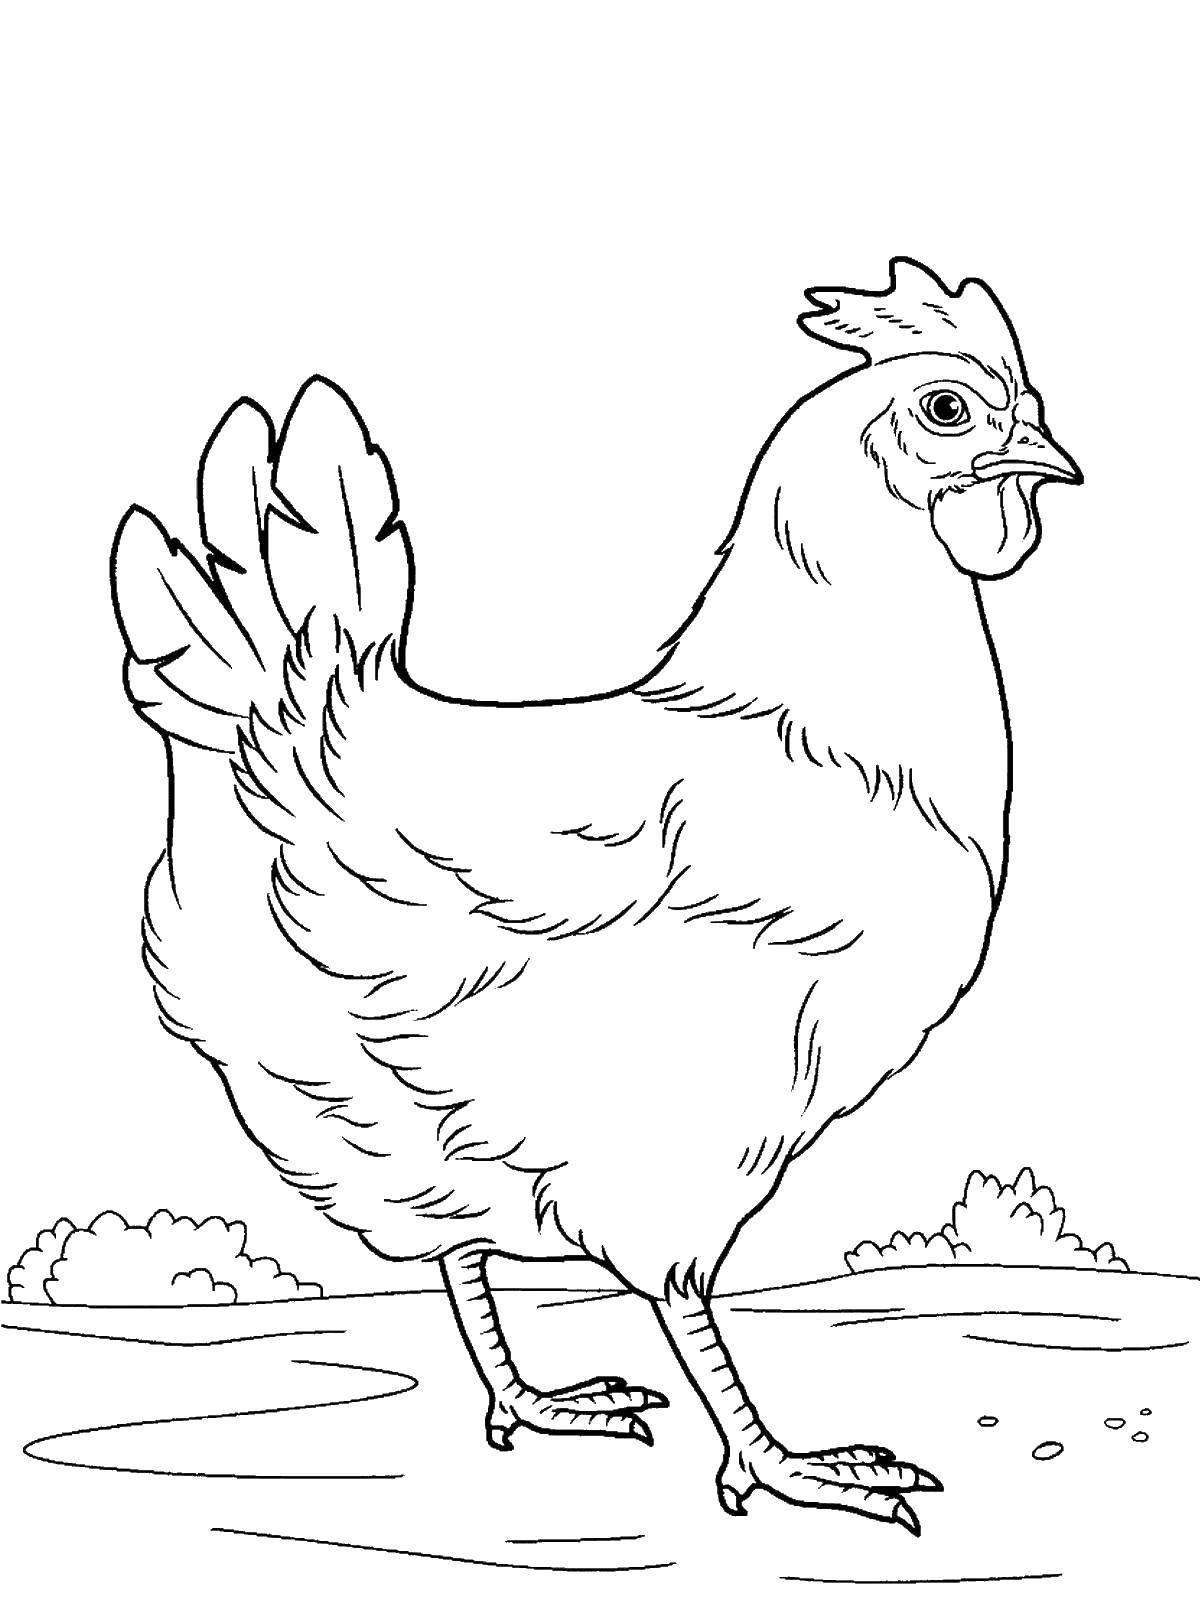 Coloring Serious chicken. Category Pets allowed. Tags:  Birds.